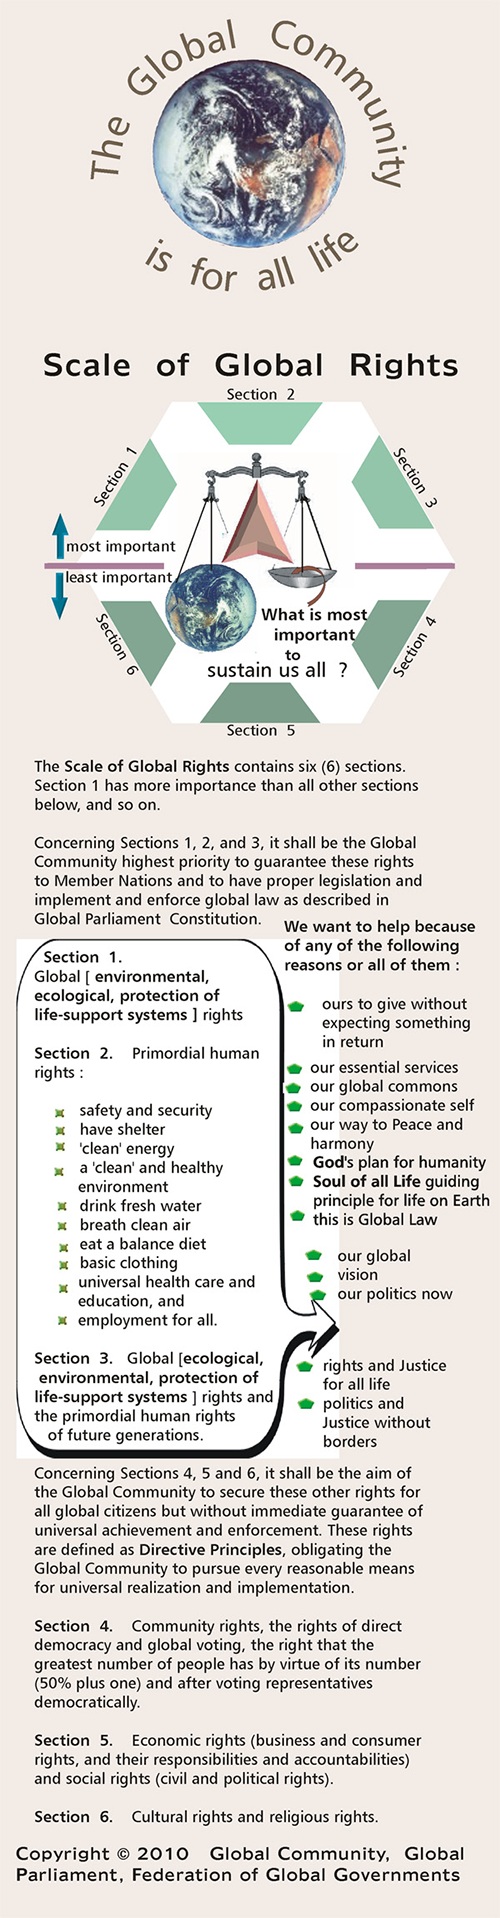 Scale of Global Rights